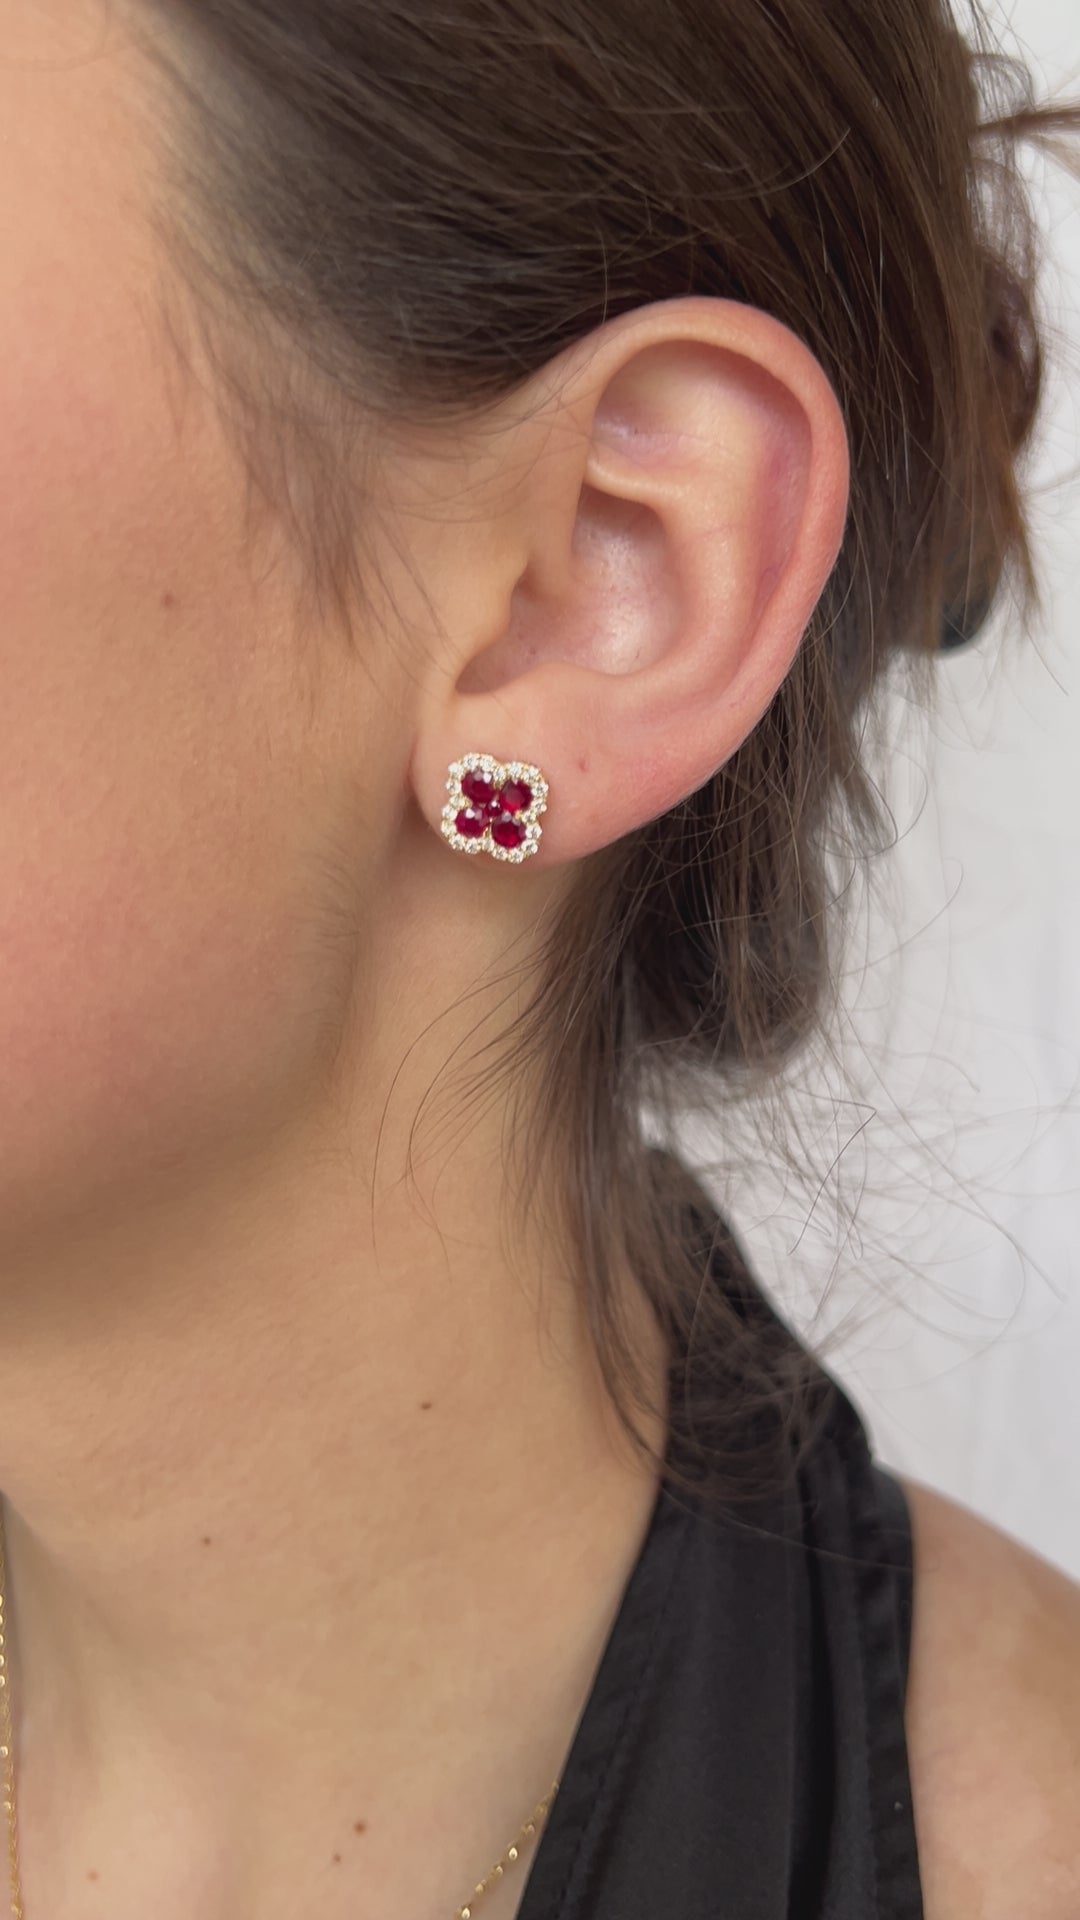 14K Yellow Gold Diamond and Ruby Clover Earrings